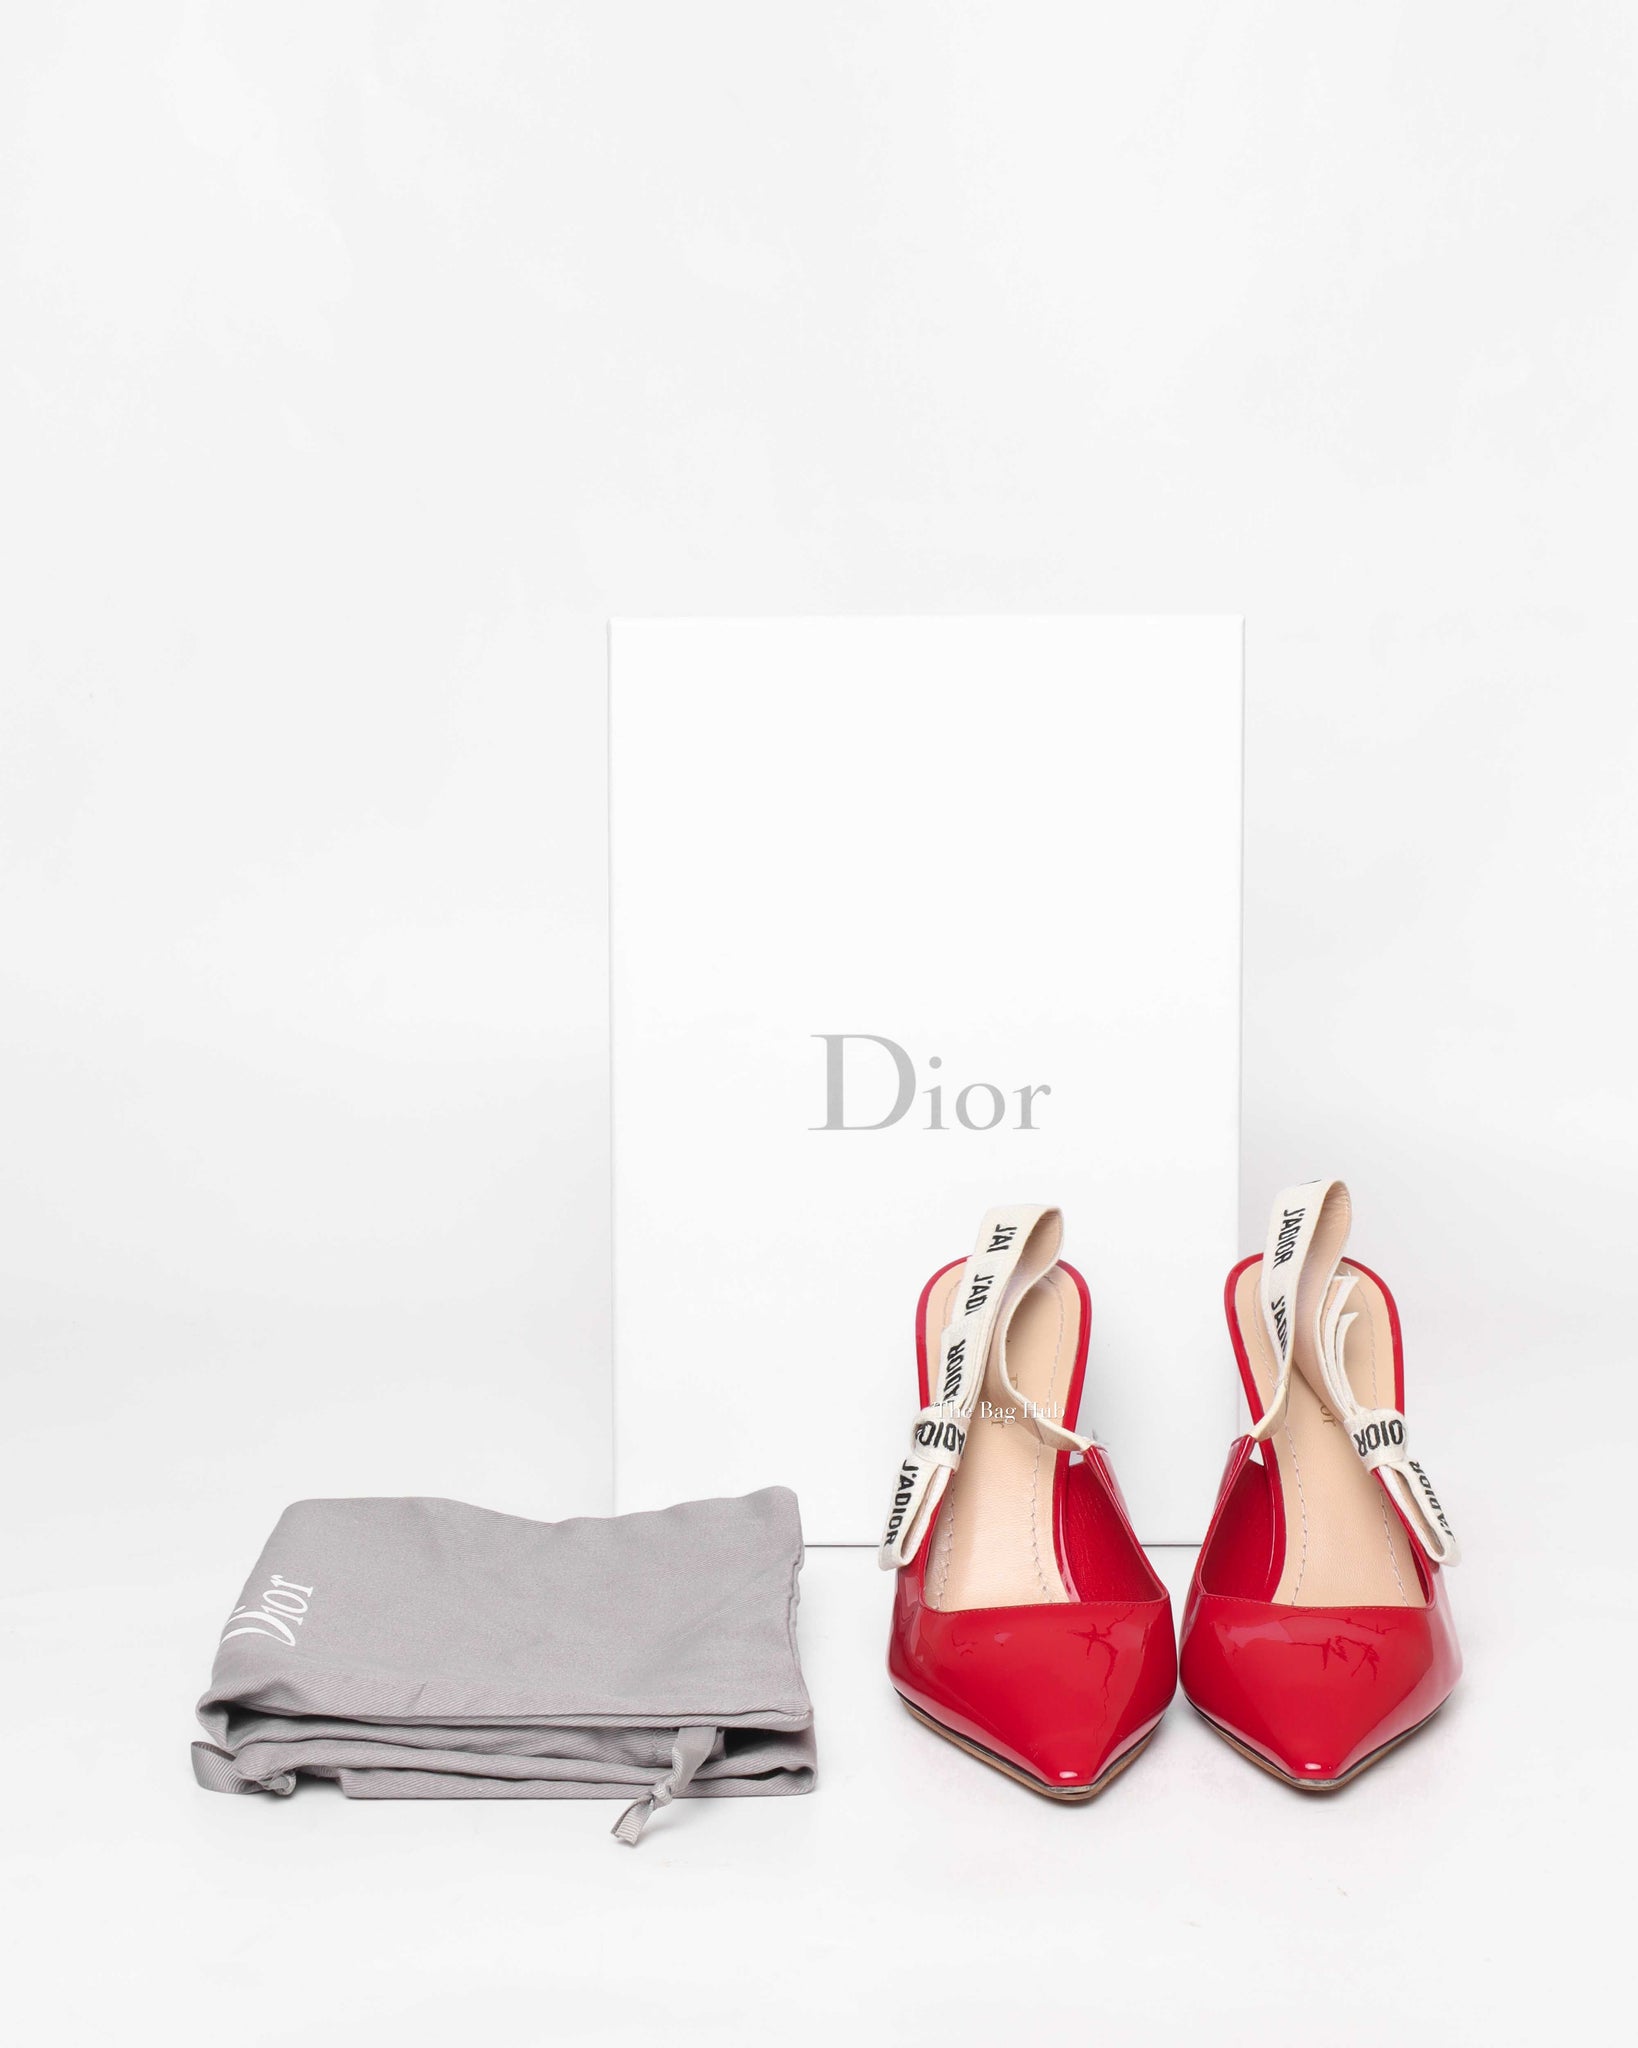 Dior Red Patent Leather J'adior Size 39-9